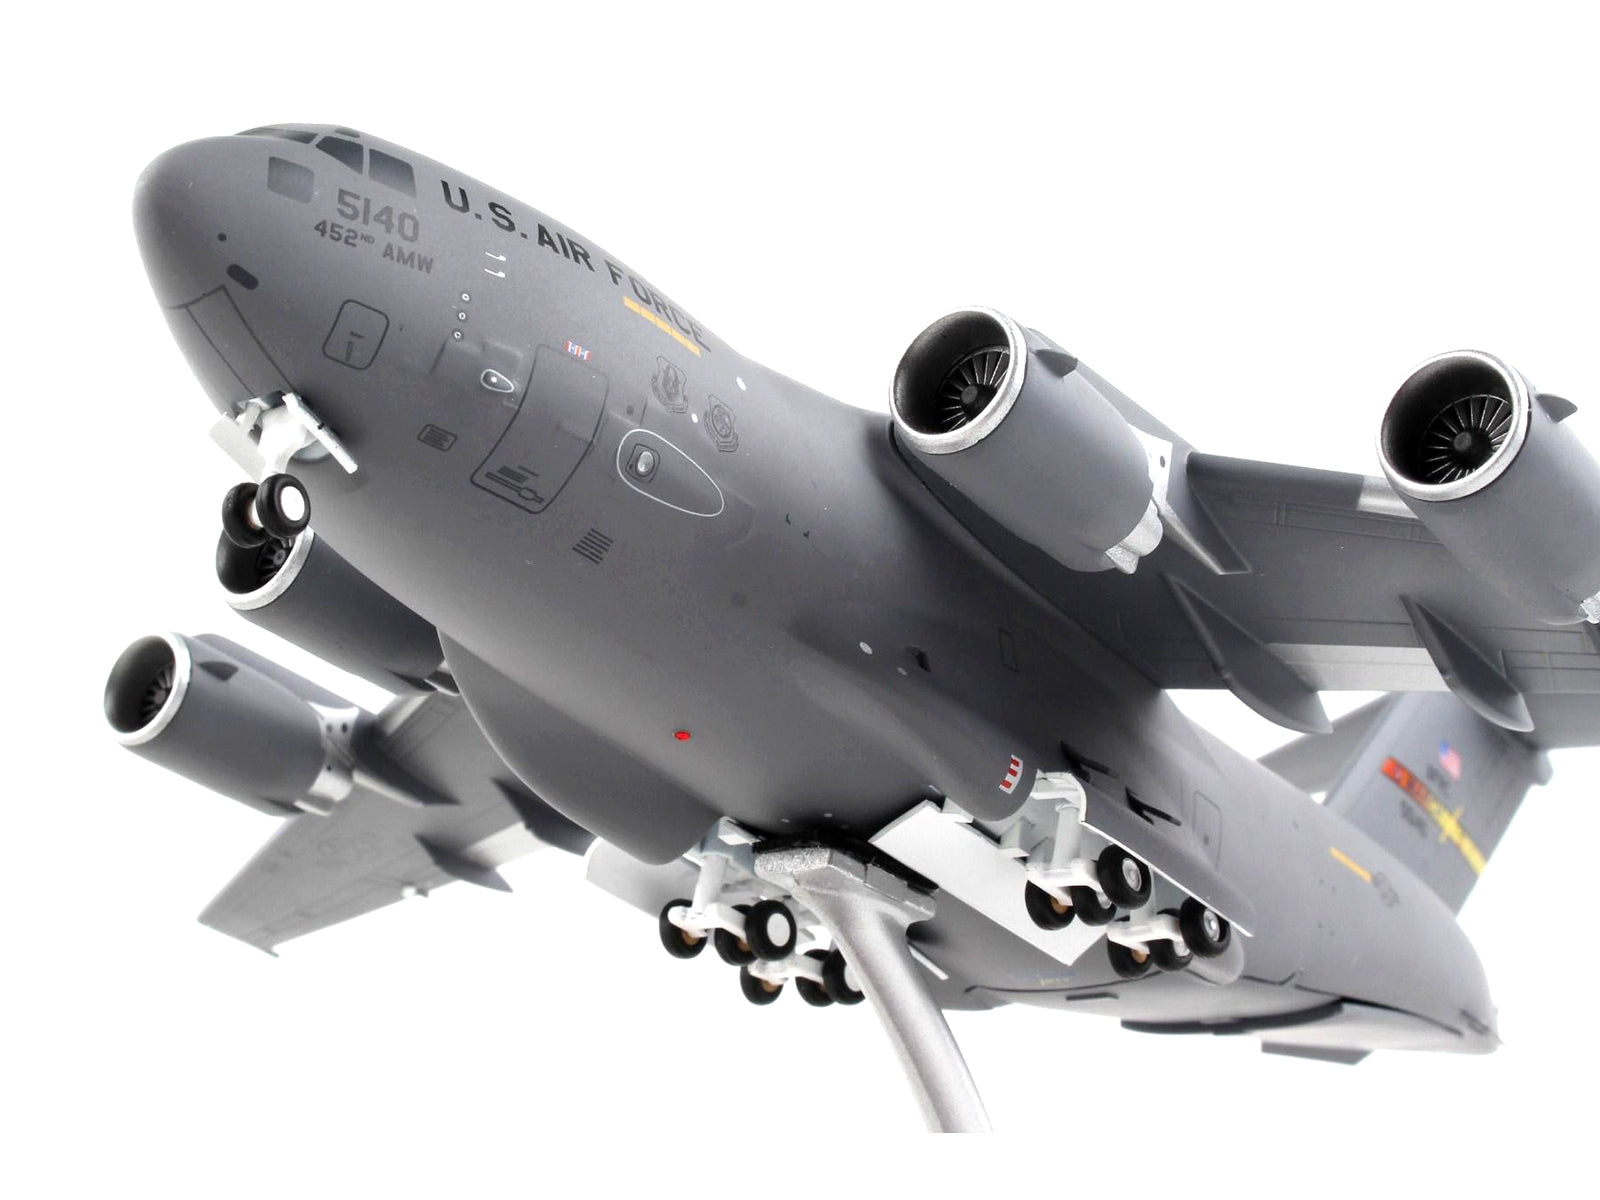 Boeing C-17 Globemaster III Transport Aircraft "March Air Force Base" United States Air Force